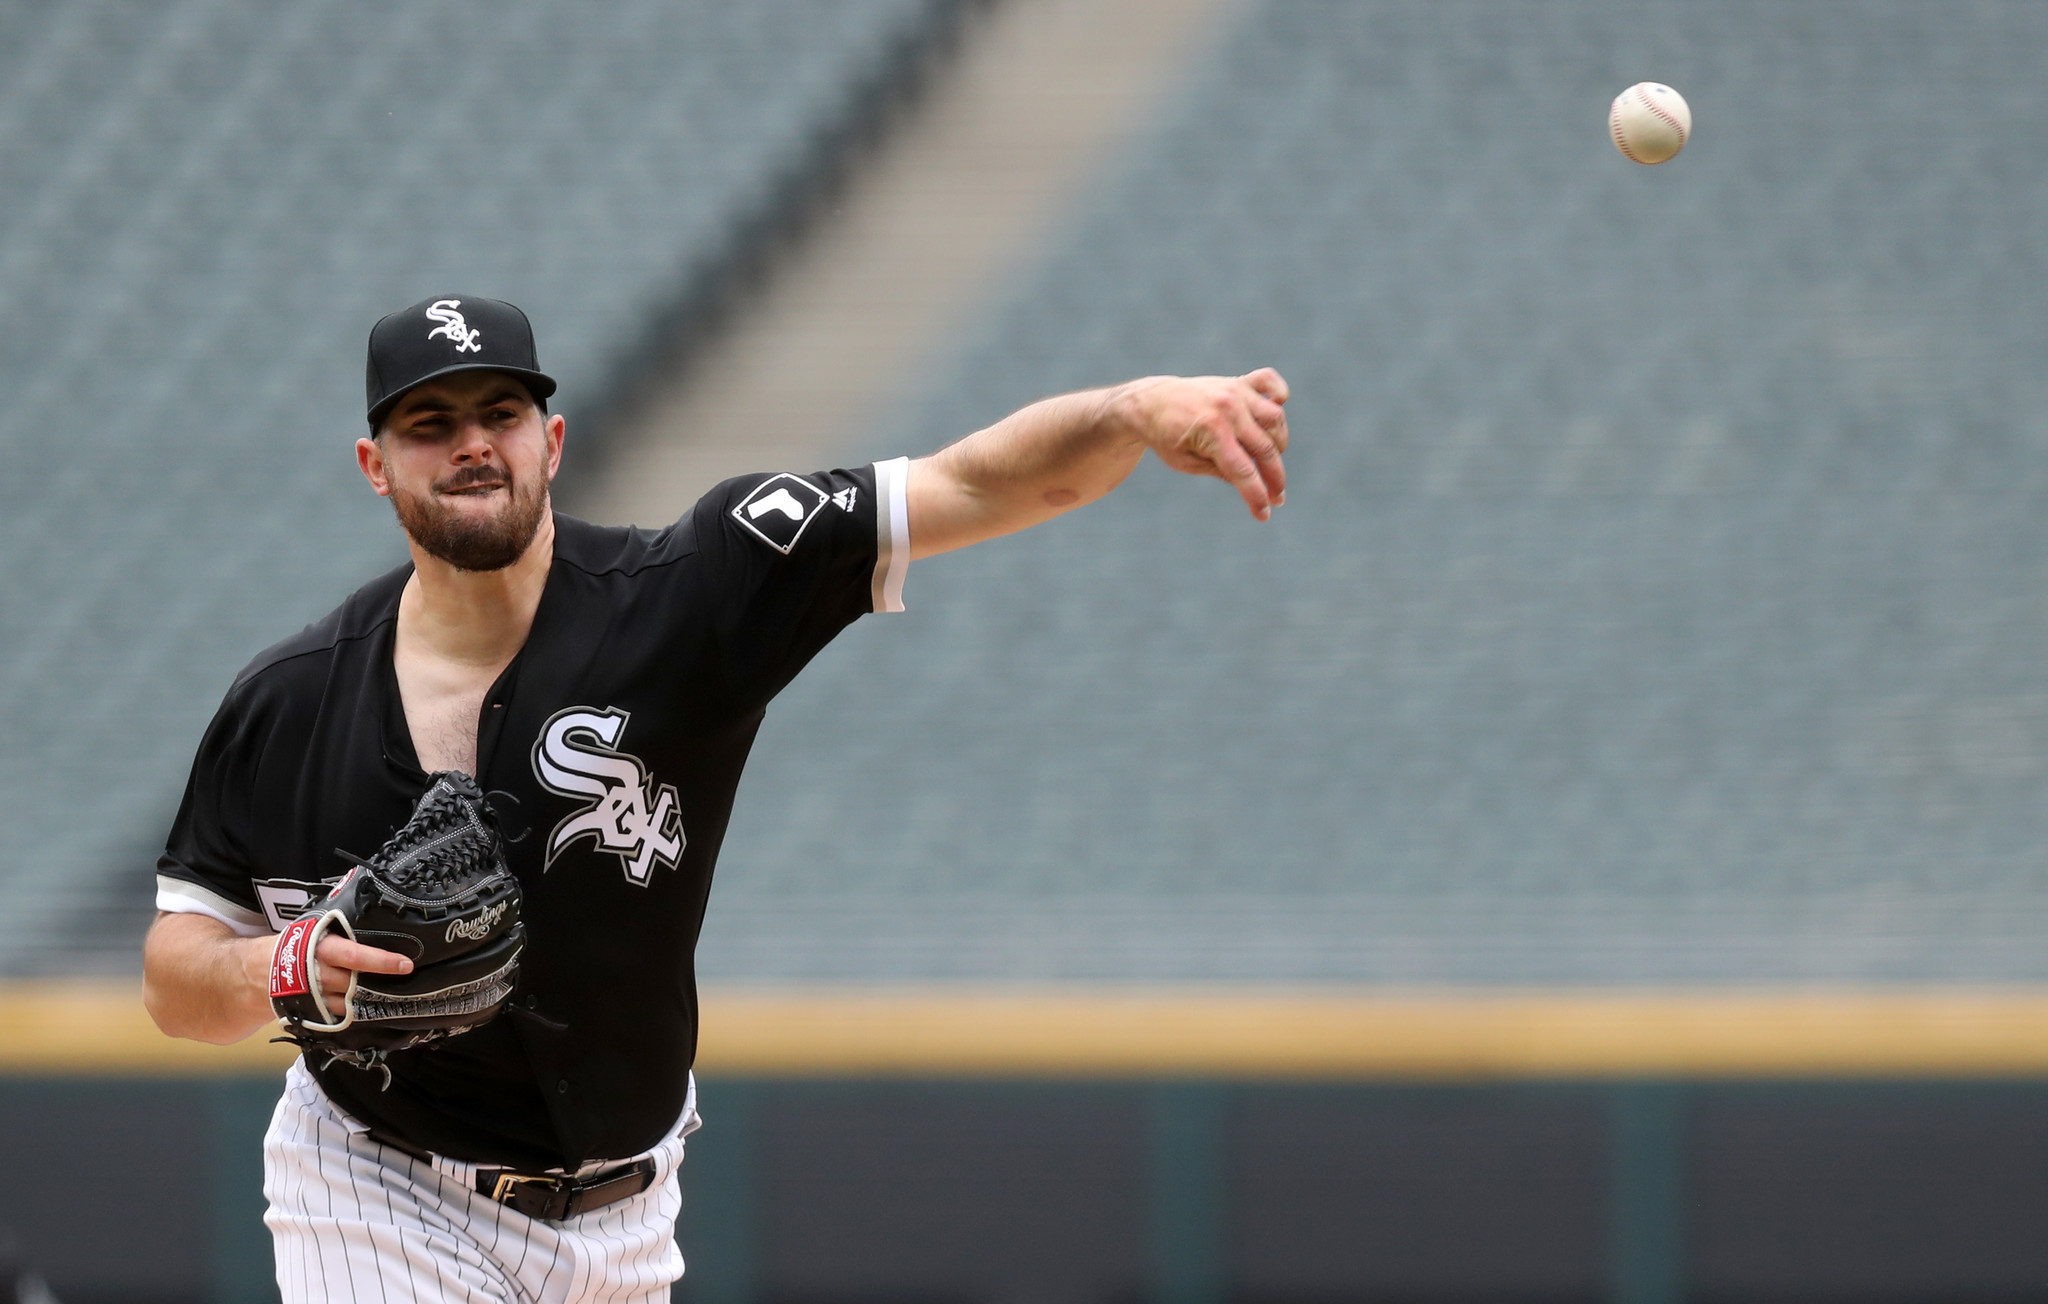 Tommy John surgery 'is on the table' for White Sox pitcher Carlos Rodon  after tests reveal swelling in his elbow: 'It's not a positive